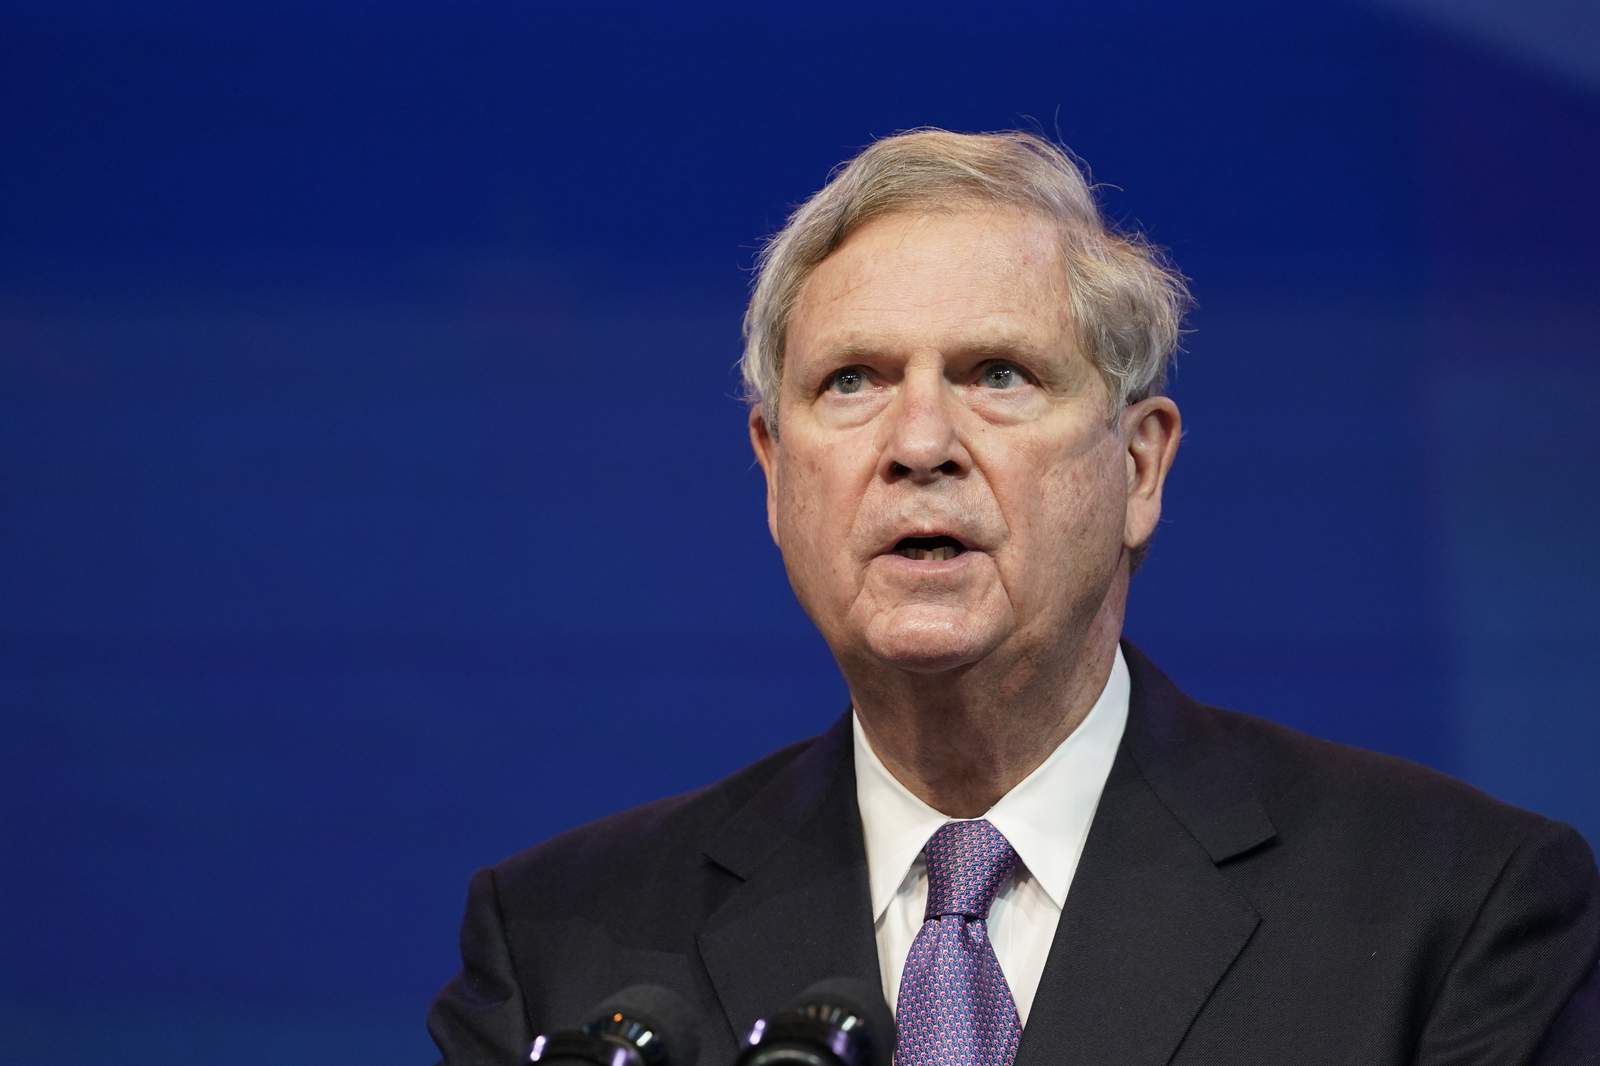 Black farmers unconvinced by Vilsack's 'root out' racism vow